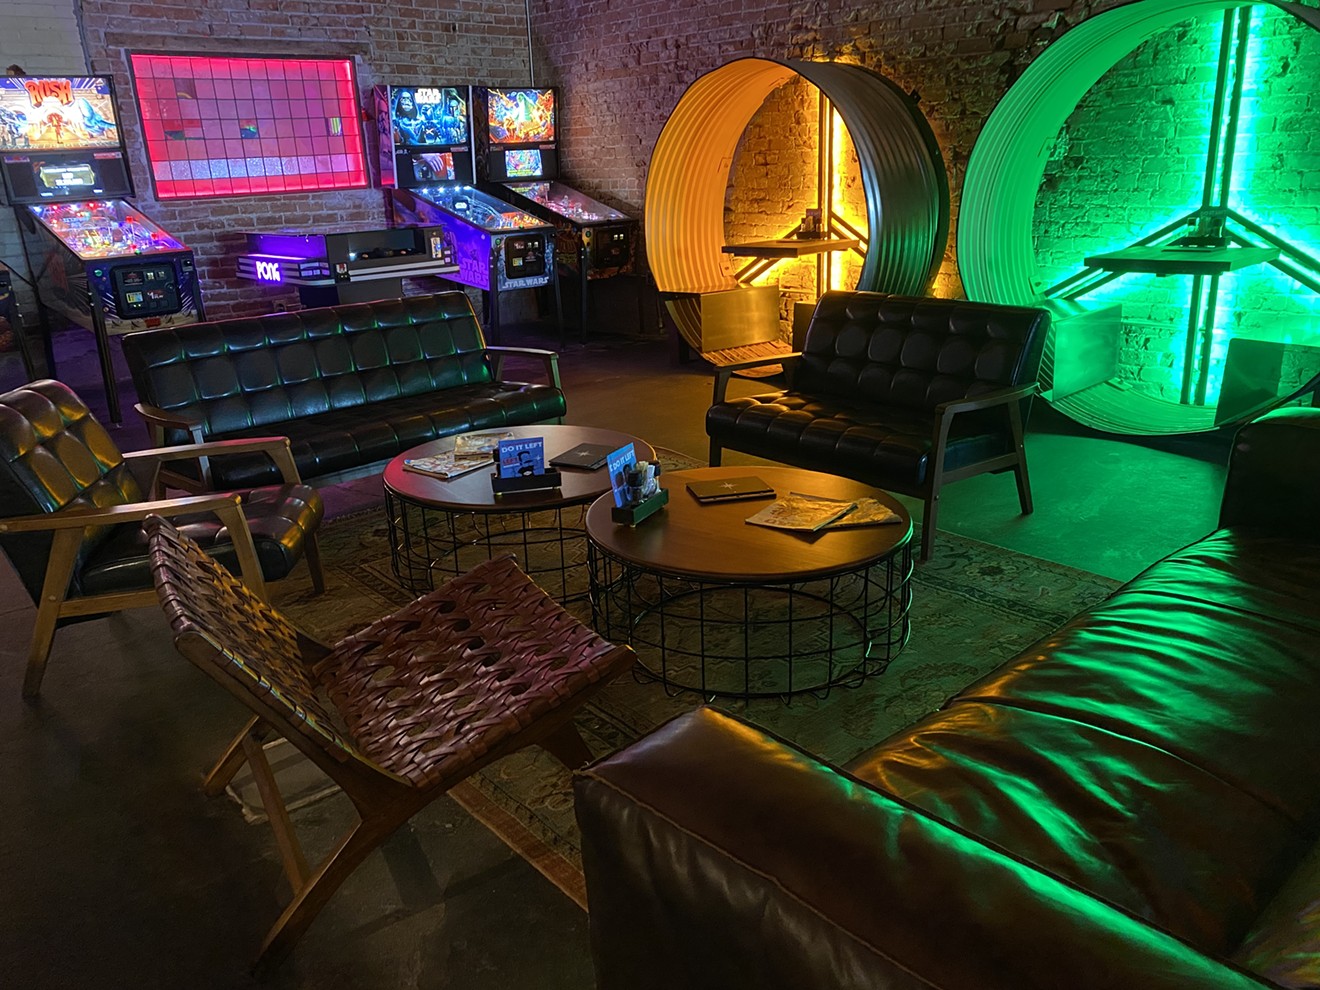 A lounge area with neon-lit corrugated metal pods and pinball machines set a vintage vibe.